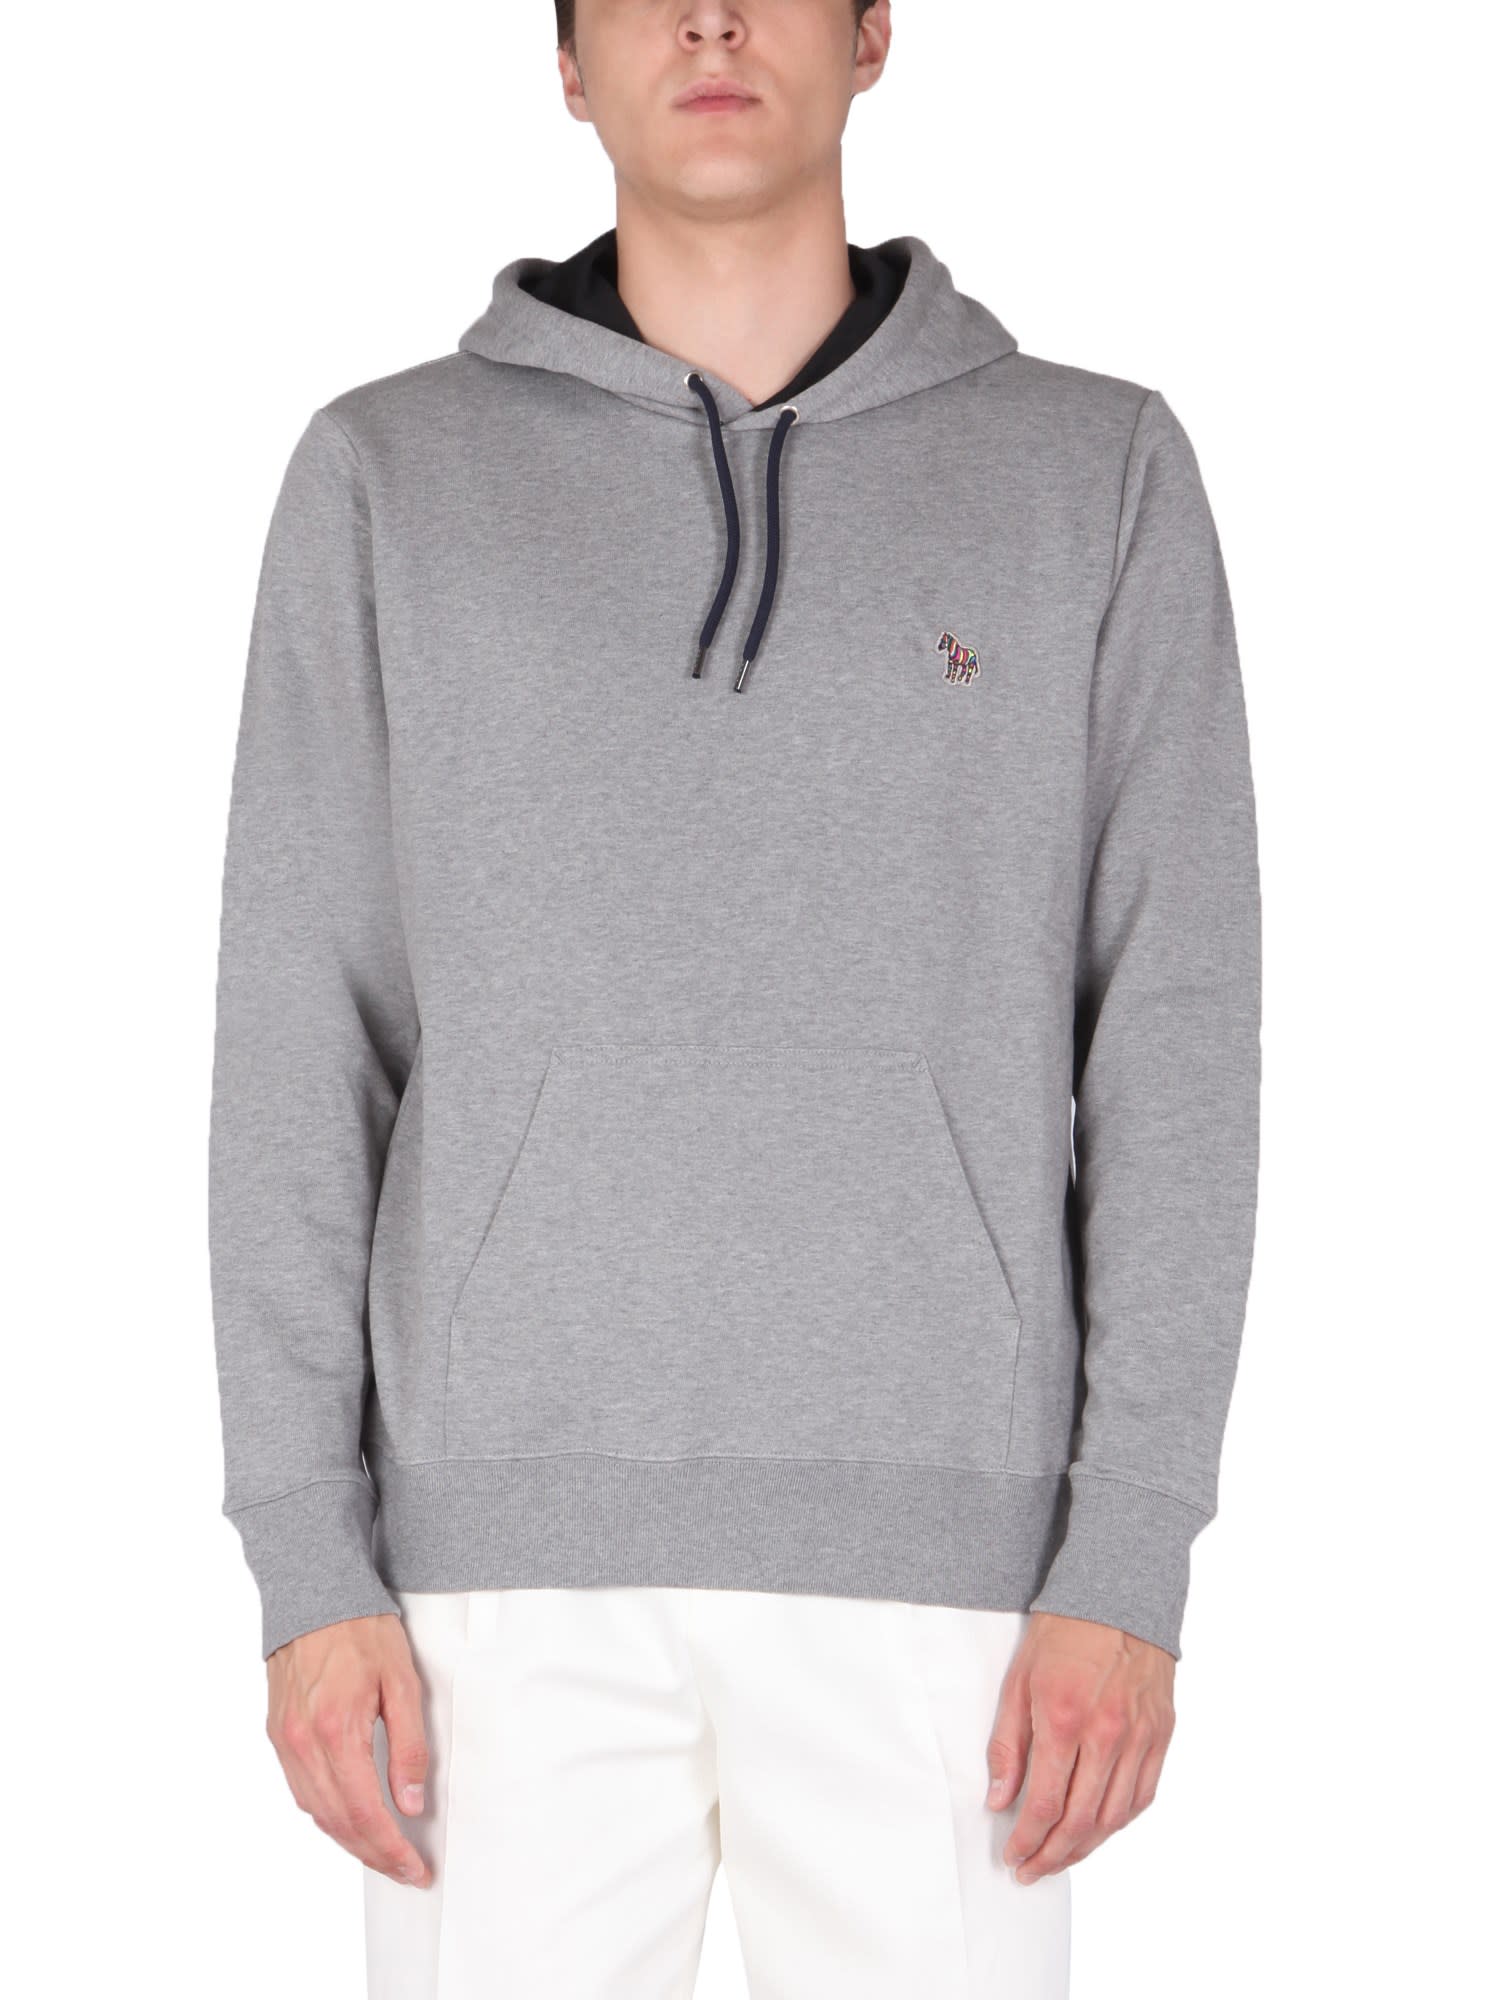 PS by Paul Smith Hooded Sweatshirt With Zebra Patch